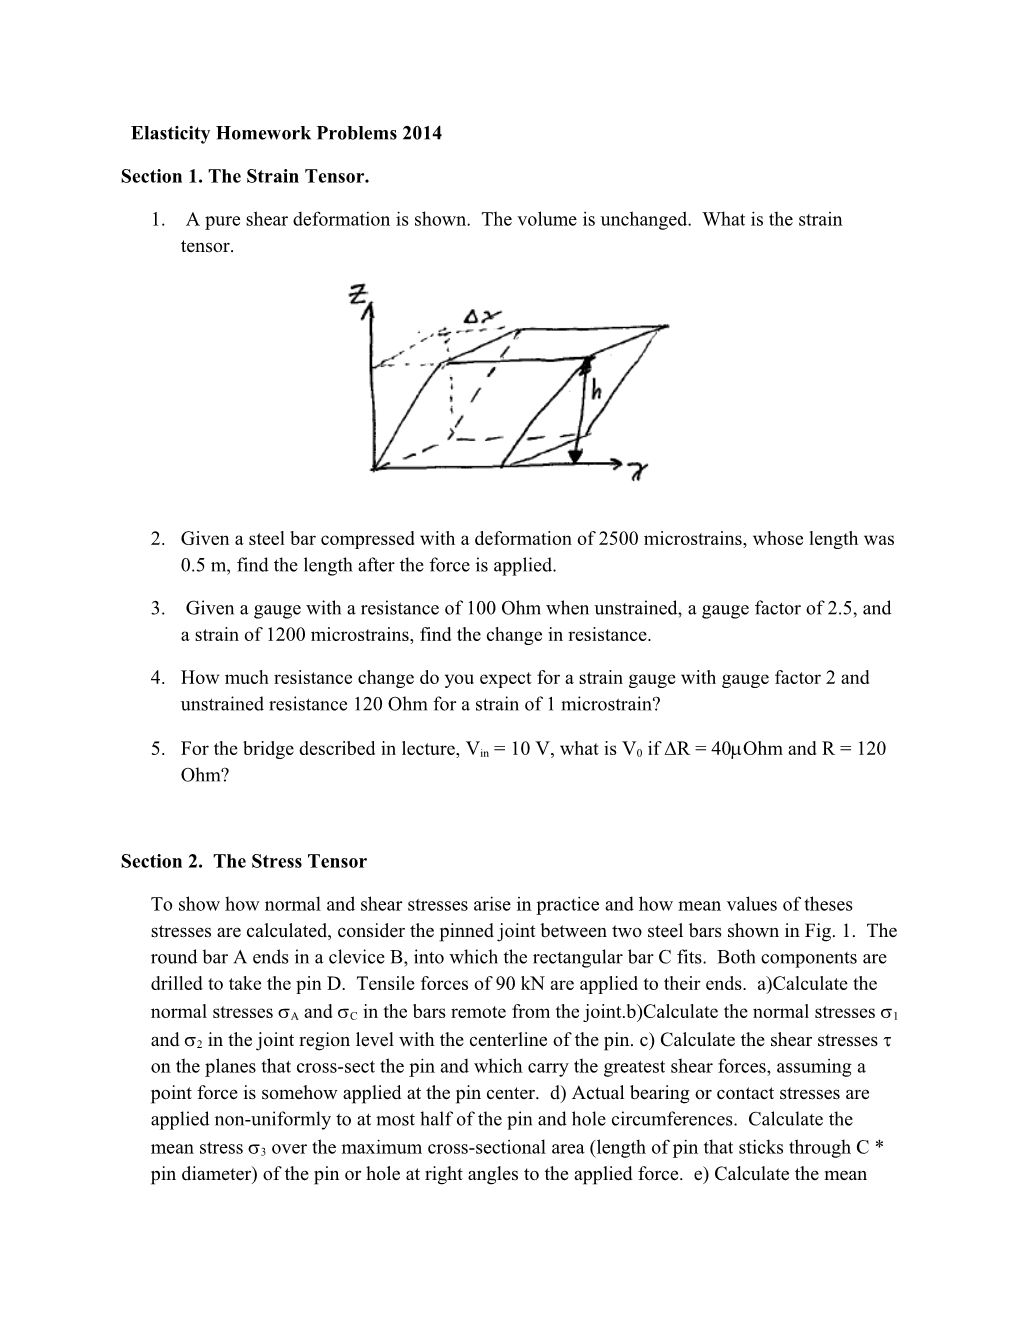 Section 1.The Strain Tensor